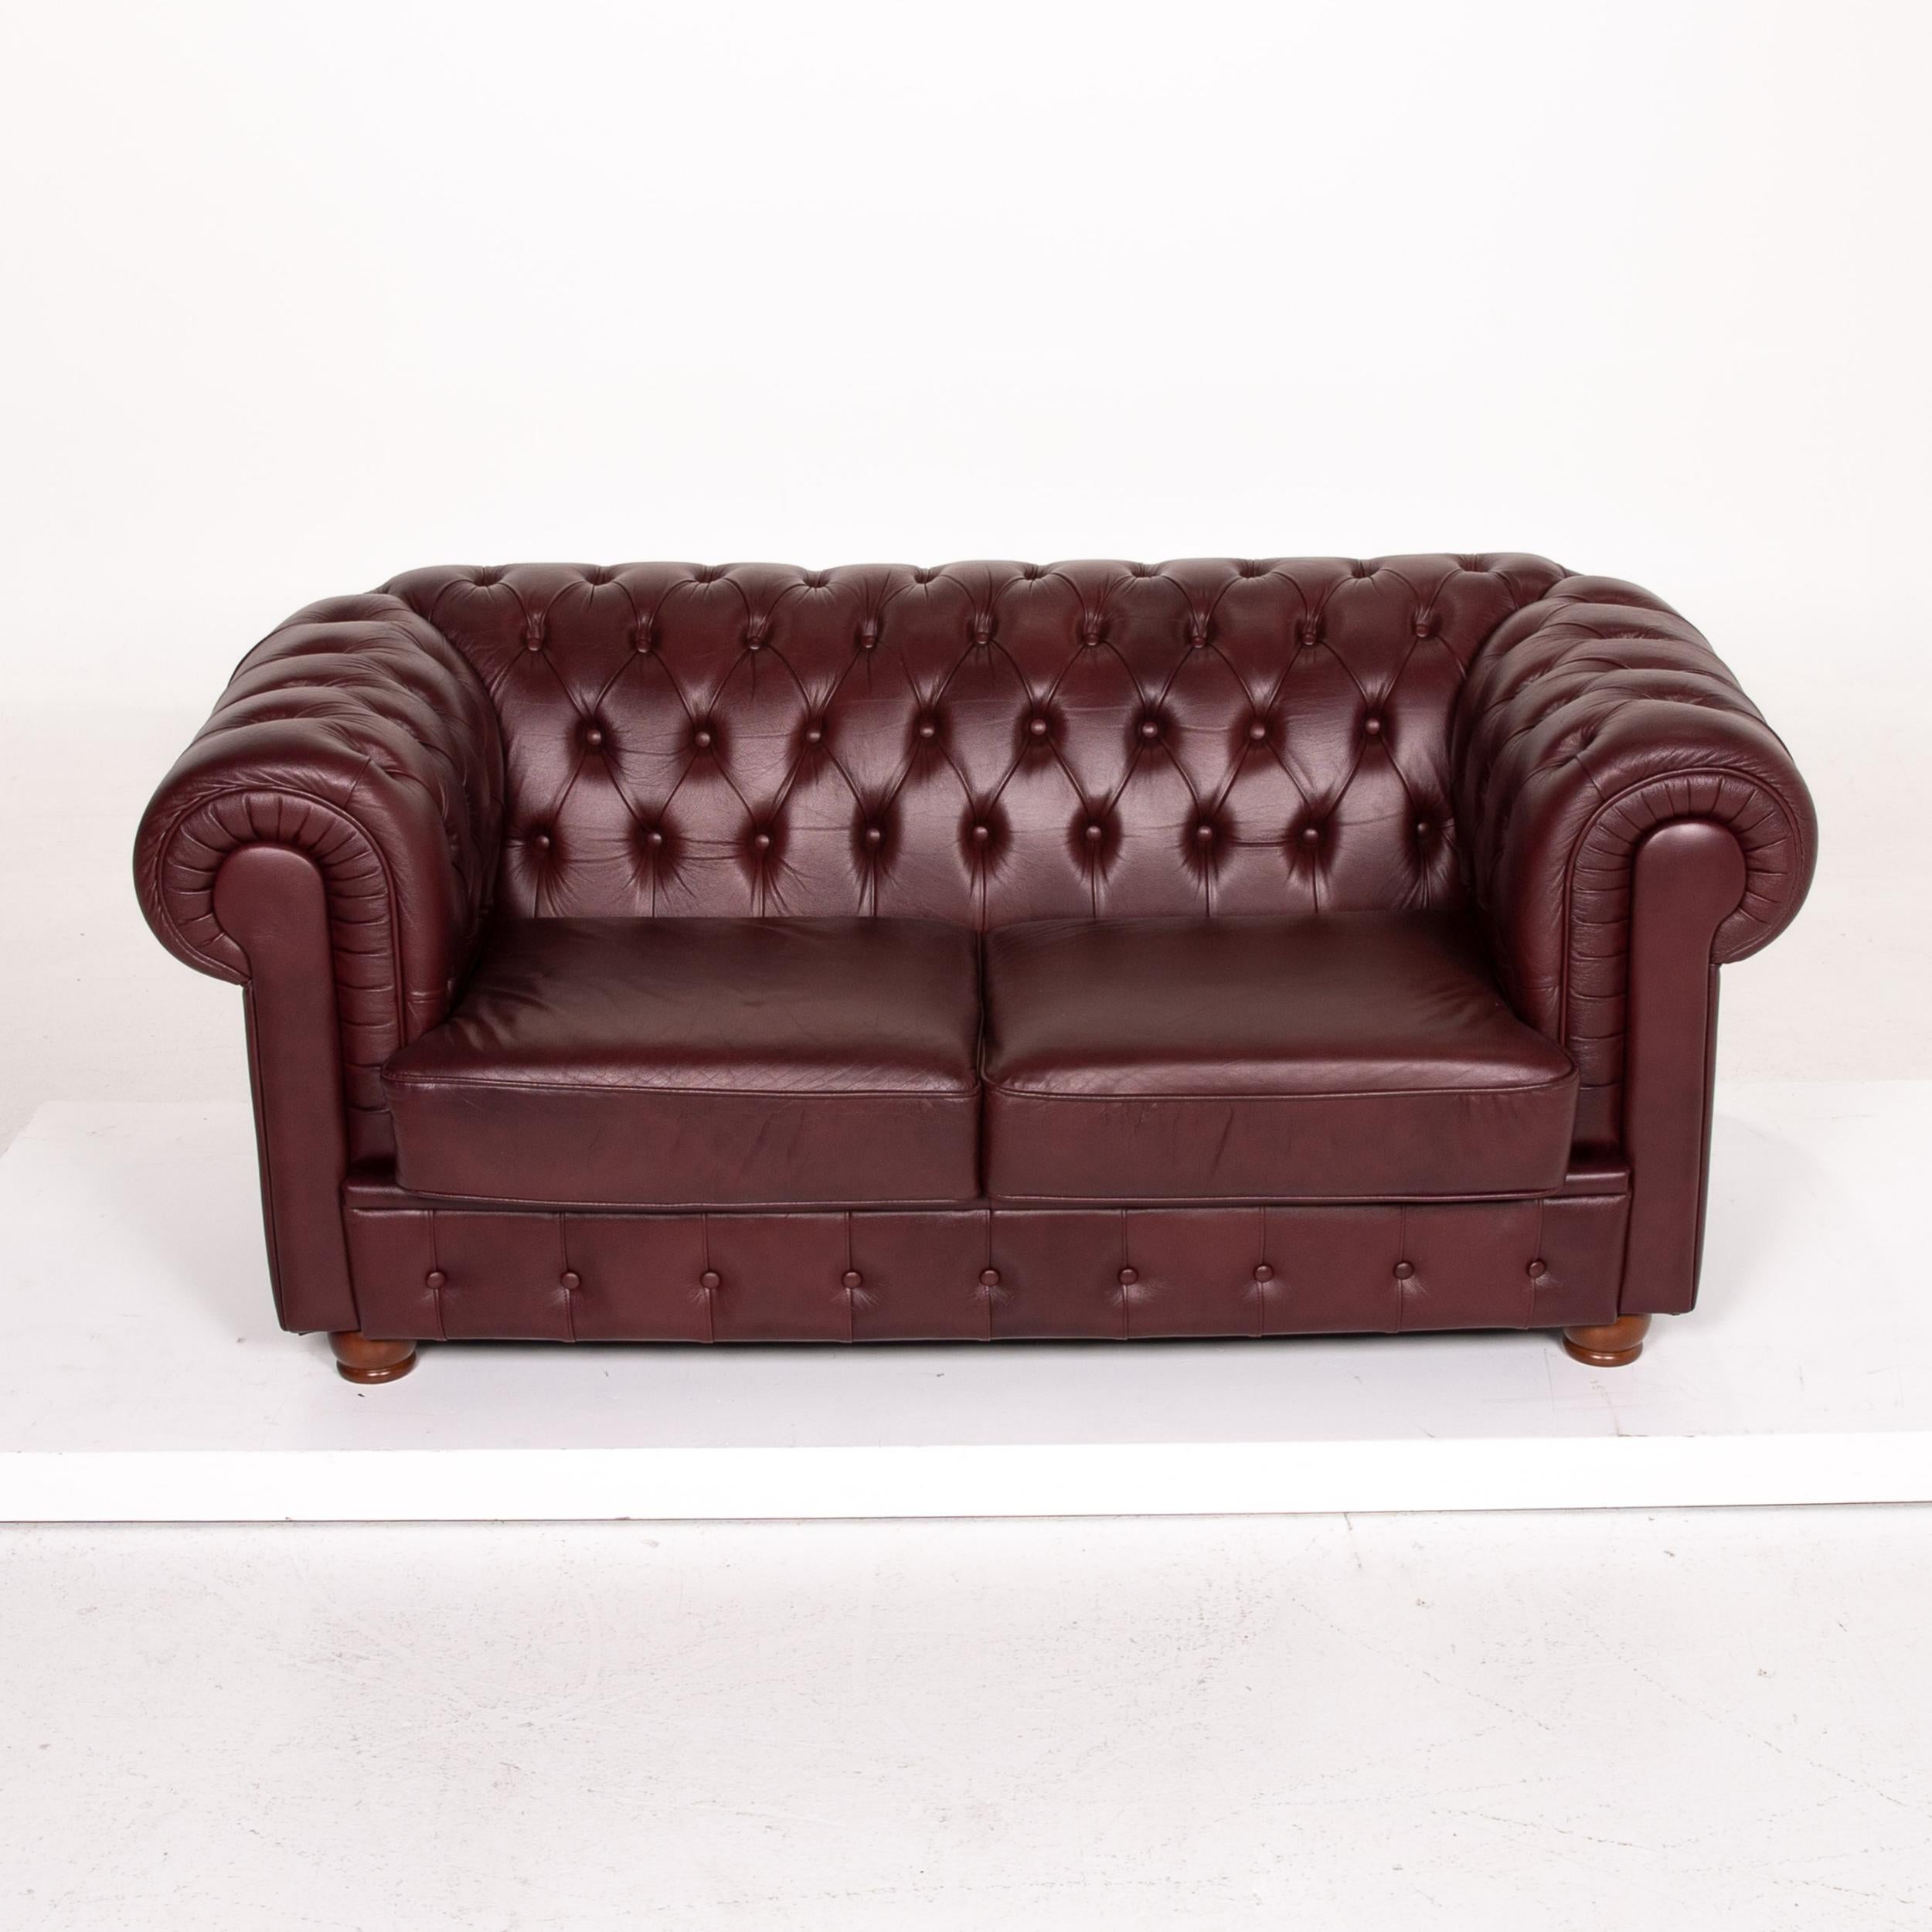 British Chesterfield Leather Sofa Bordeaux Red Two-Seat Vintage Retro Couch For Sale